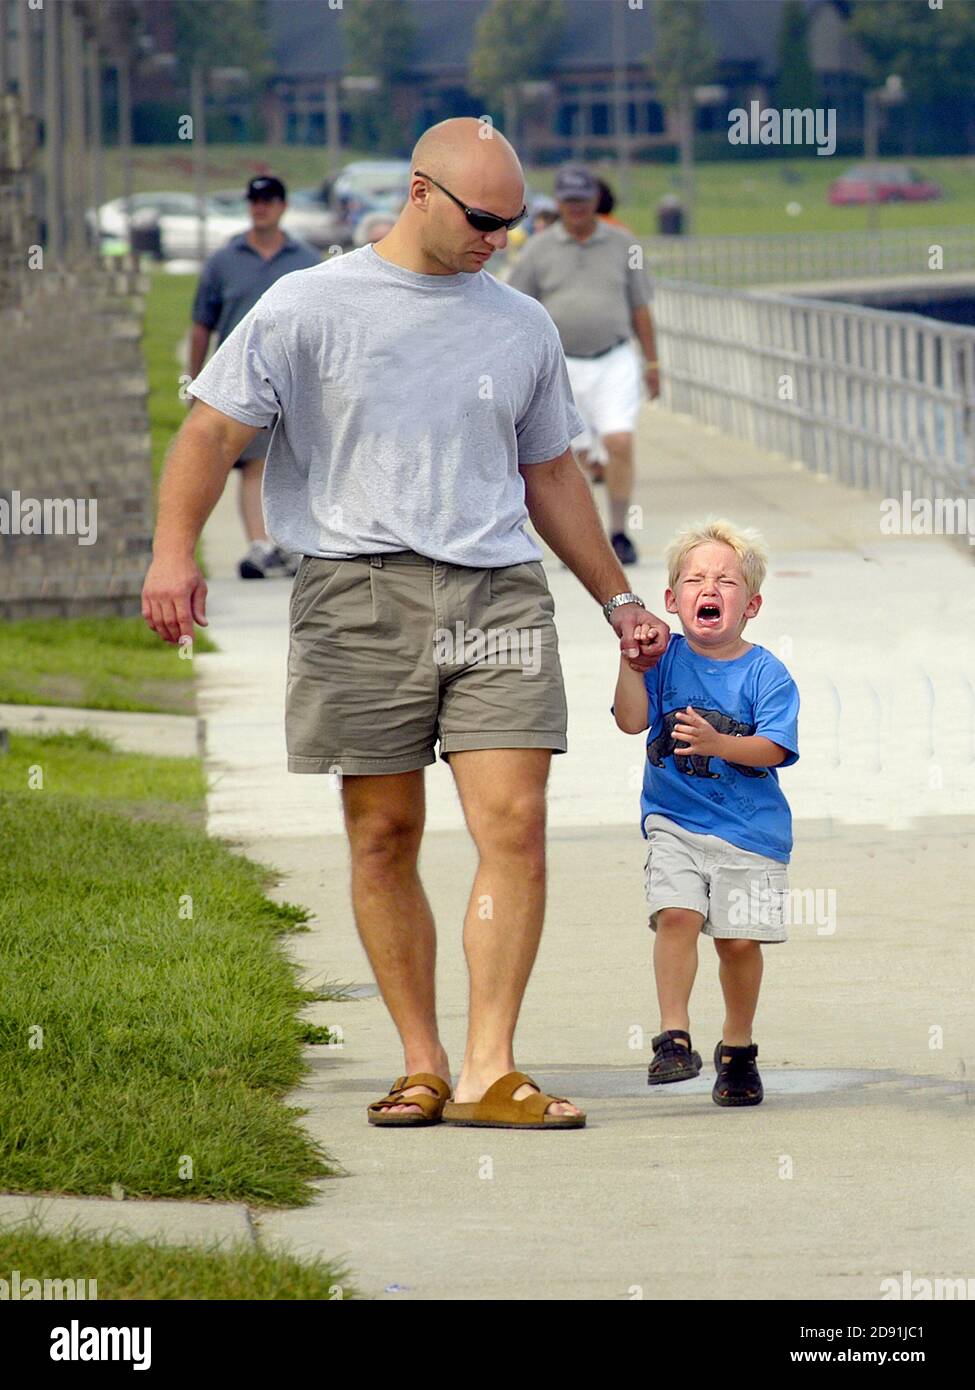 father walk with child toddler on a boardwalk one child is having temper tantrum angry outburst Stock Photo